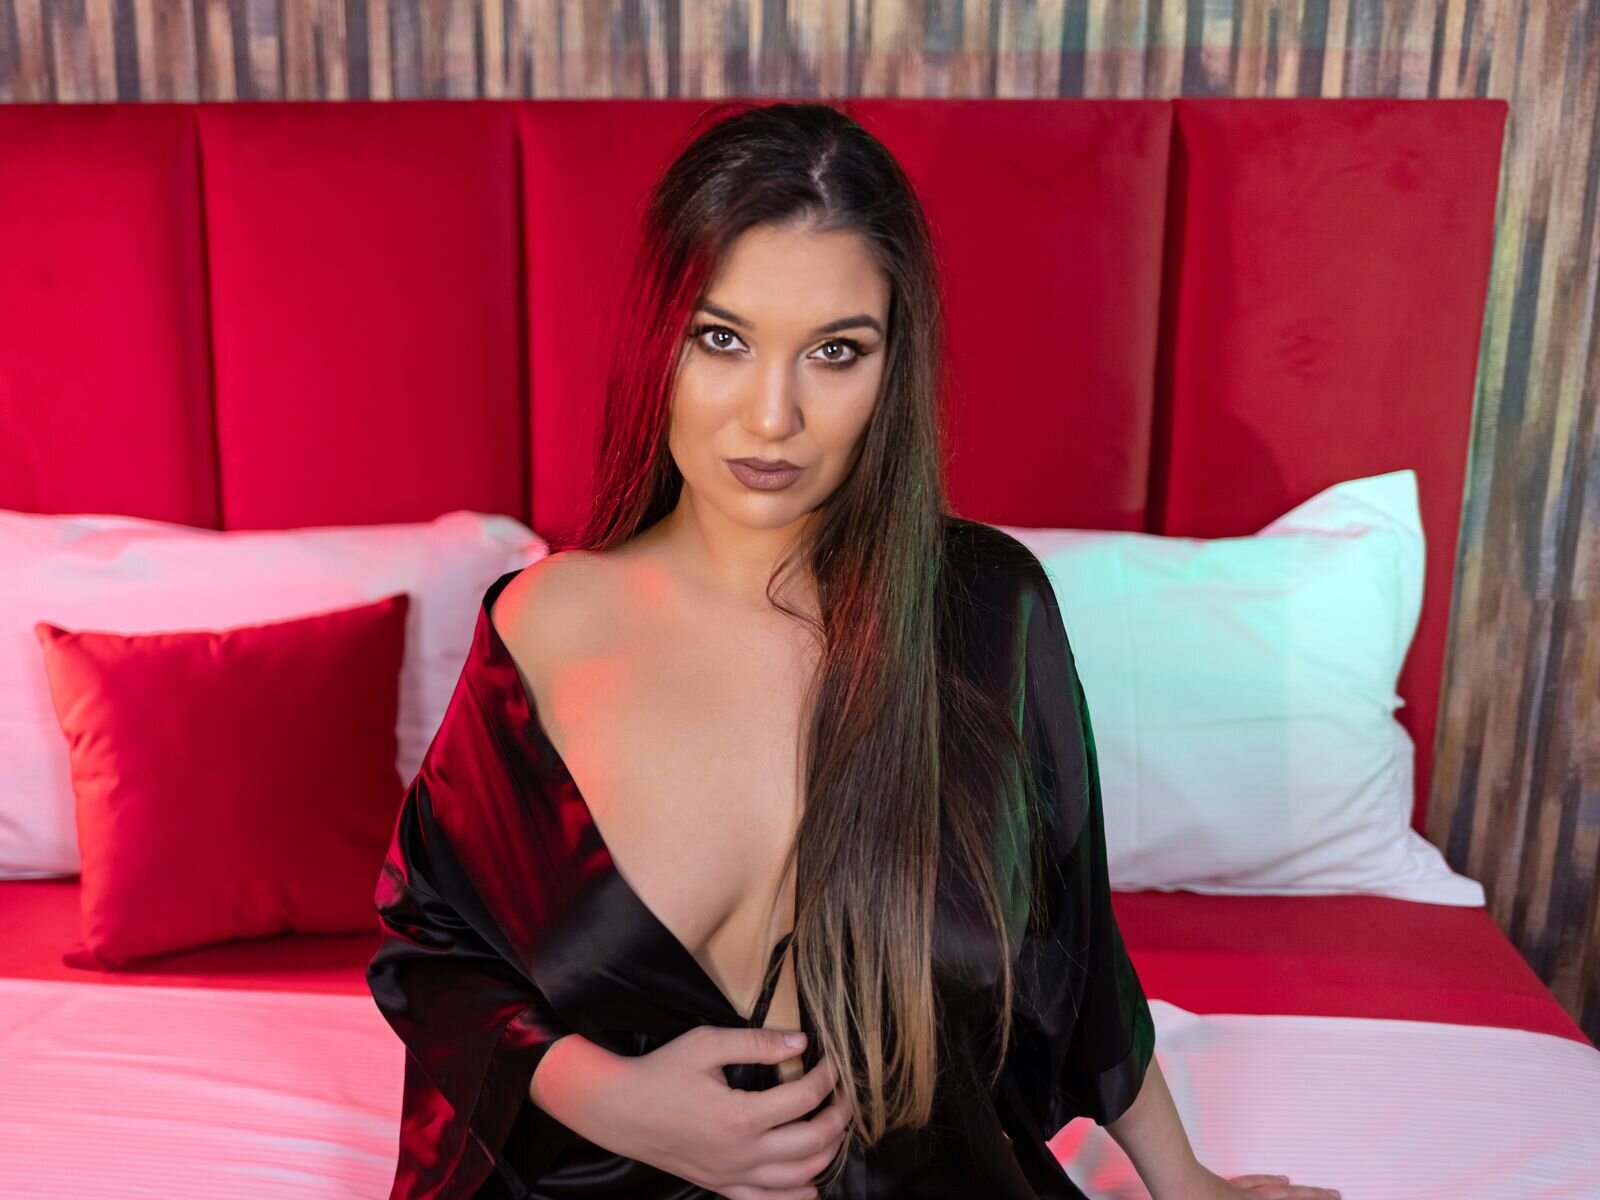 Free Live Sex Chat With JulieSilva